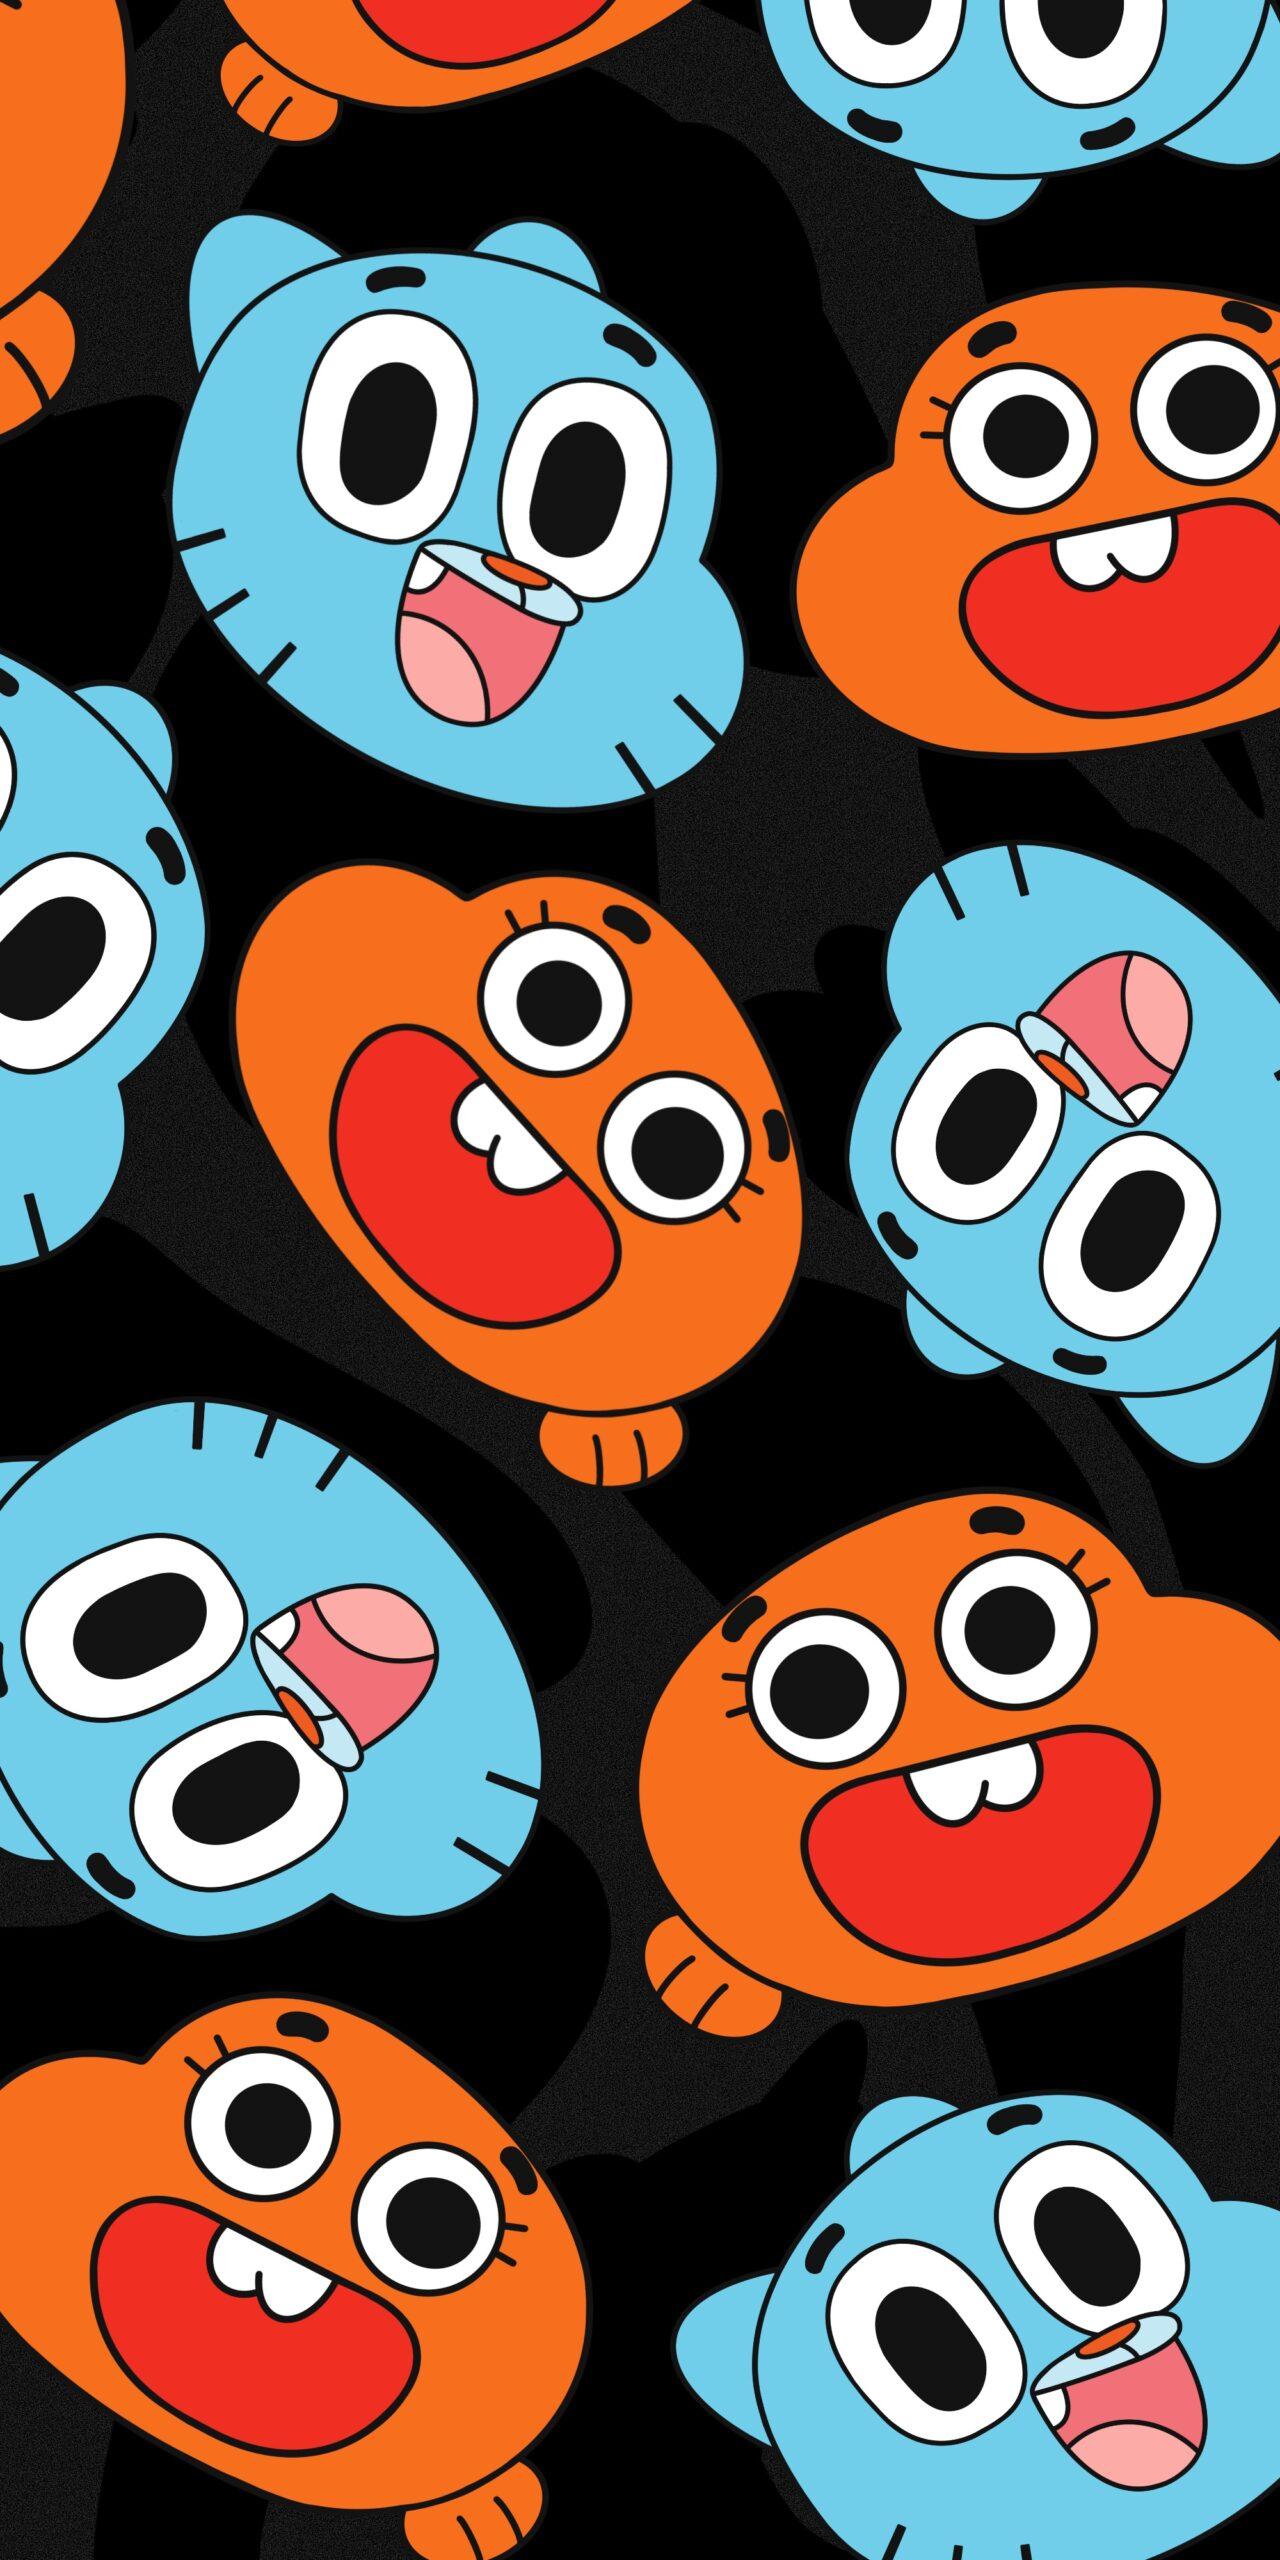 Gumball Aesthetic Wallpapers Top Free Gumball Aesthetic Backgrounds Wallpaperaccess